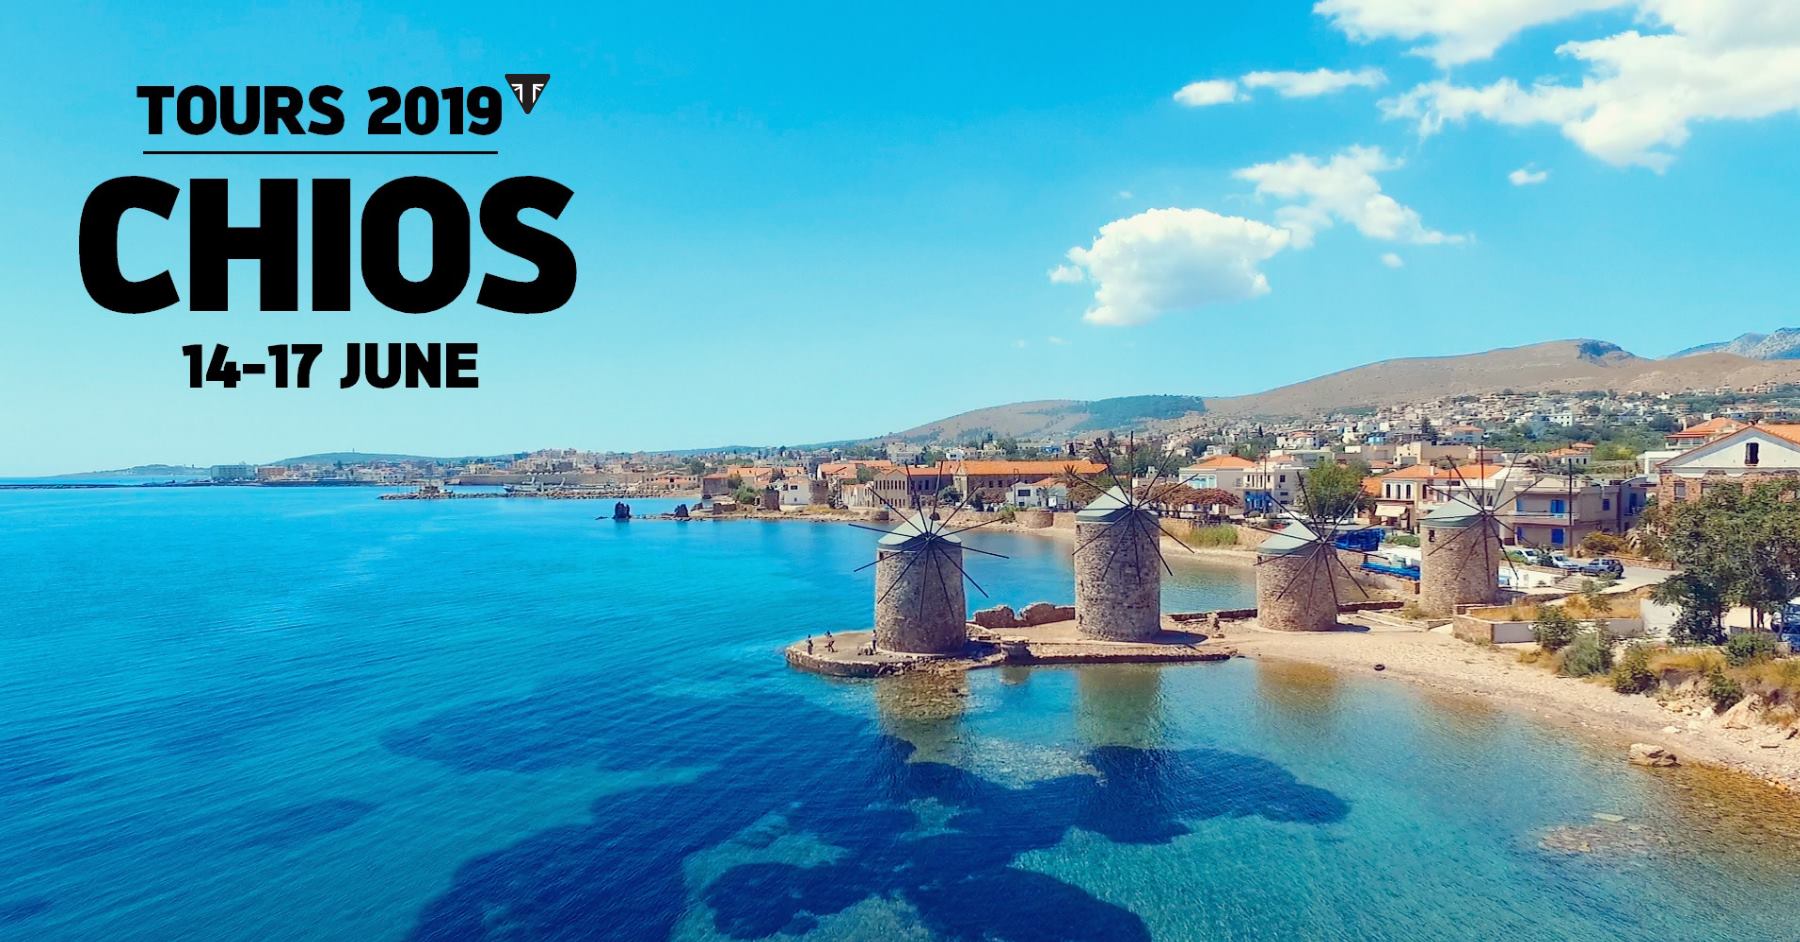 Chios Tour 2019 by Triumph Motorcycles